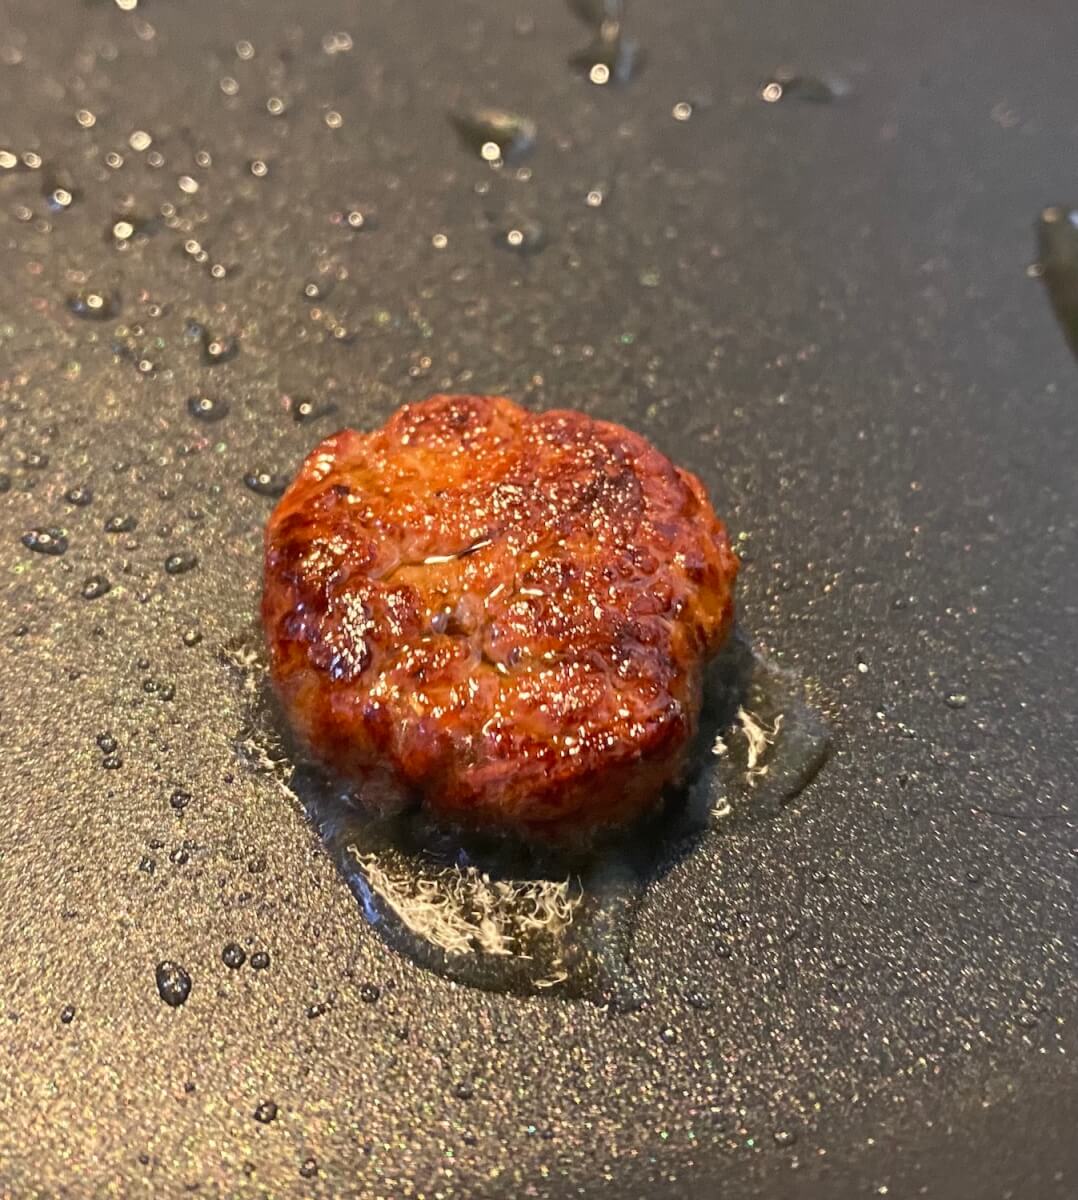 The small koji mold patty after frying